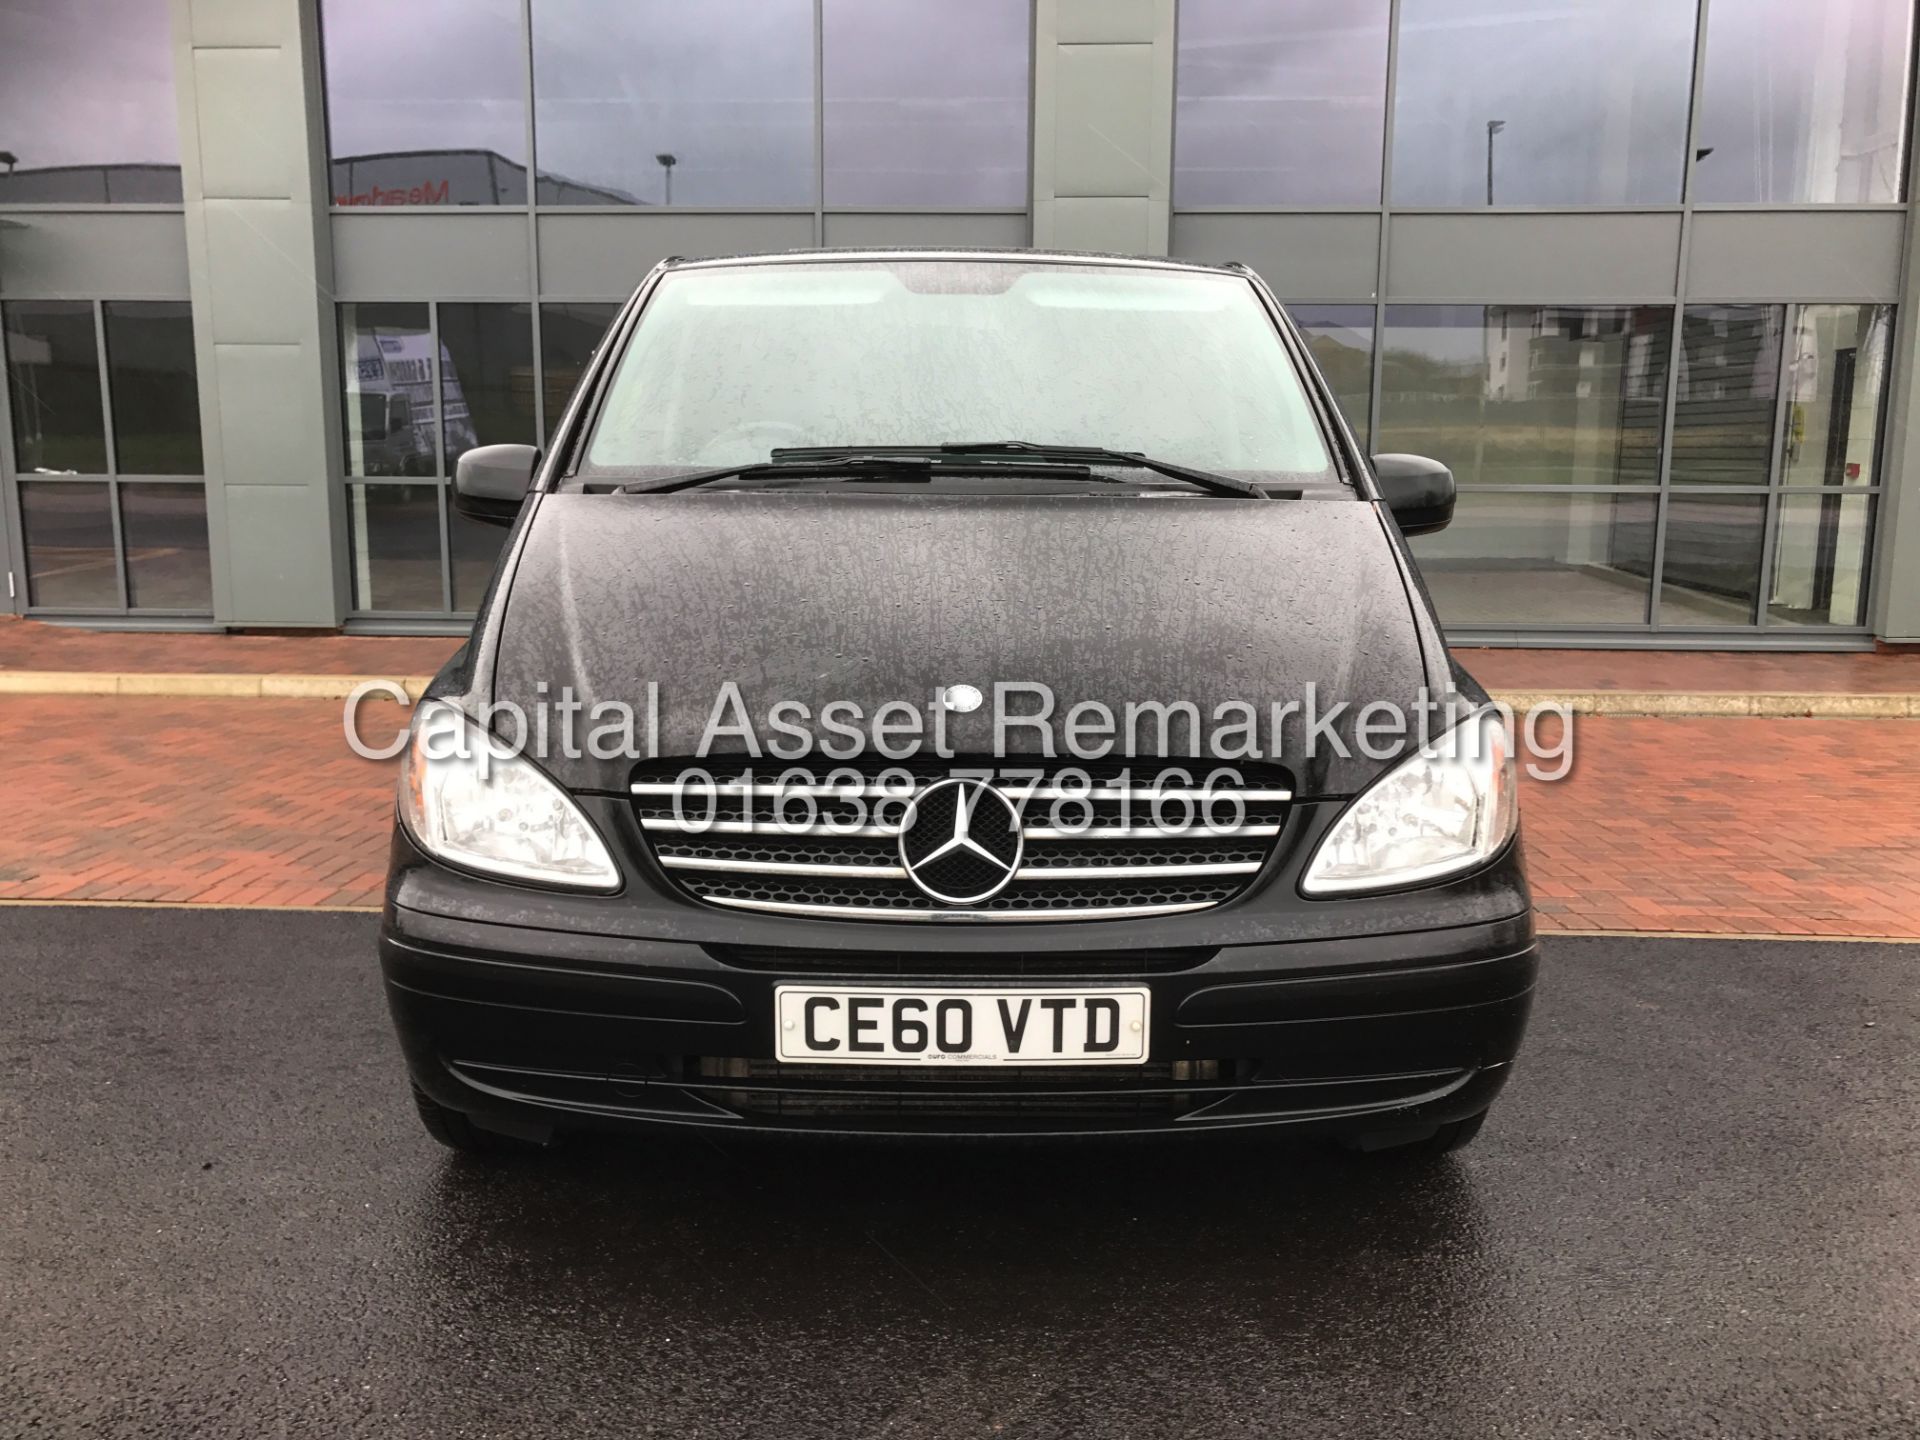 (ON SALE) MERCEDES VITO "SPORTY - 115BHP" LWB (2011 MODEL) 5 SEATER DUELINER -1 OWNER-AIR CON-ALLOYS - Bild 3 aus 18